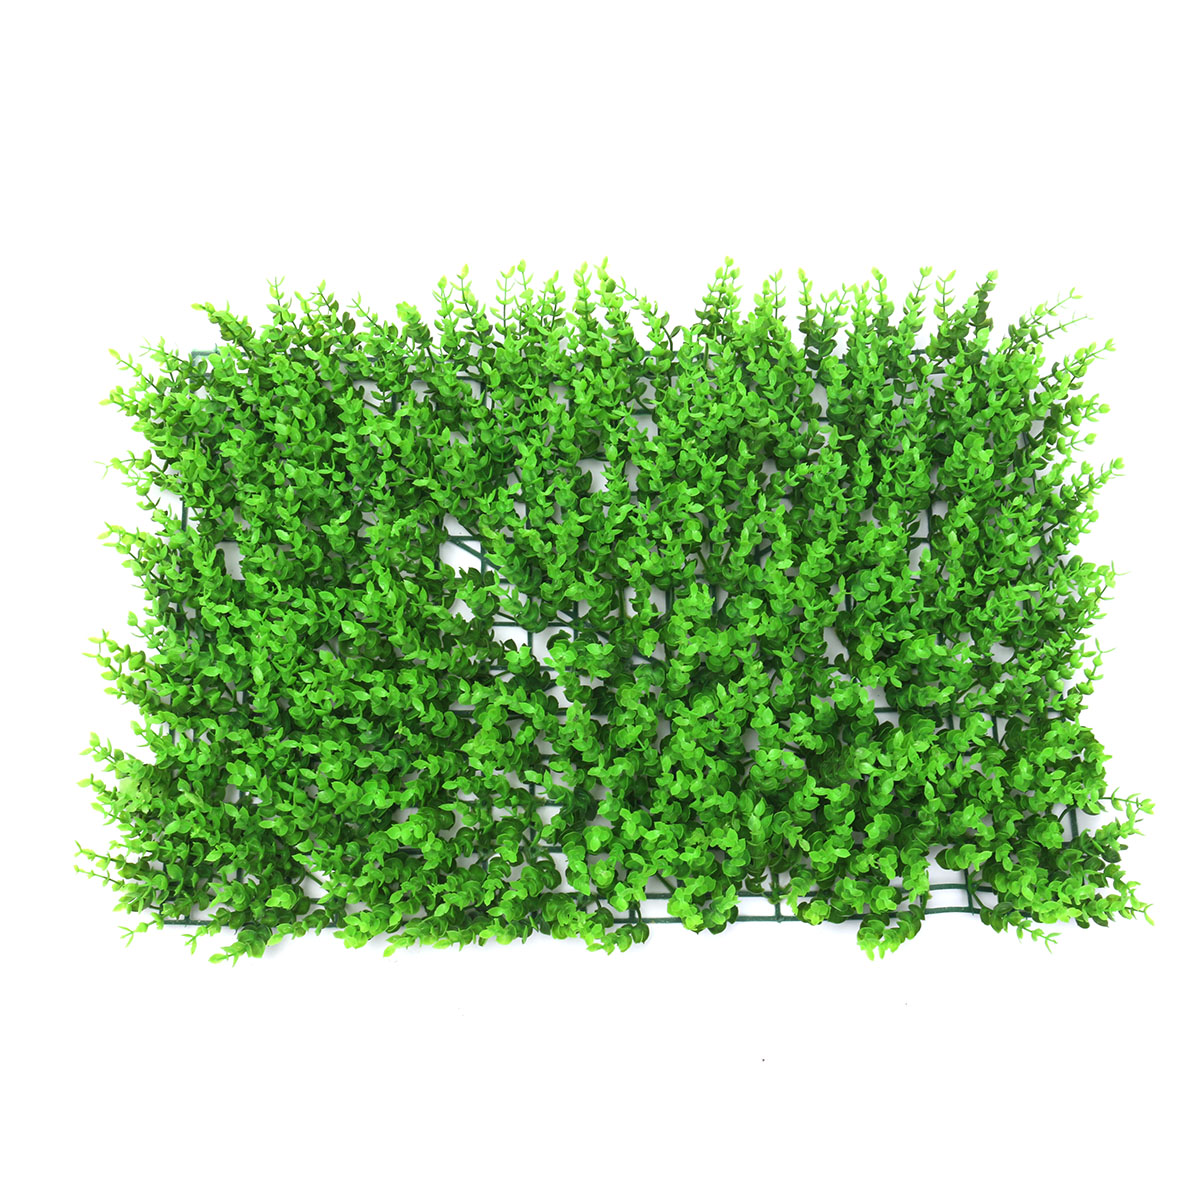 

40*60cm Artificial Plant Foliage Hedge Grass Mat Greenery Panel Decorations Wall Fence